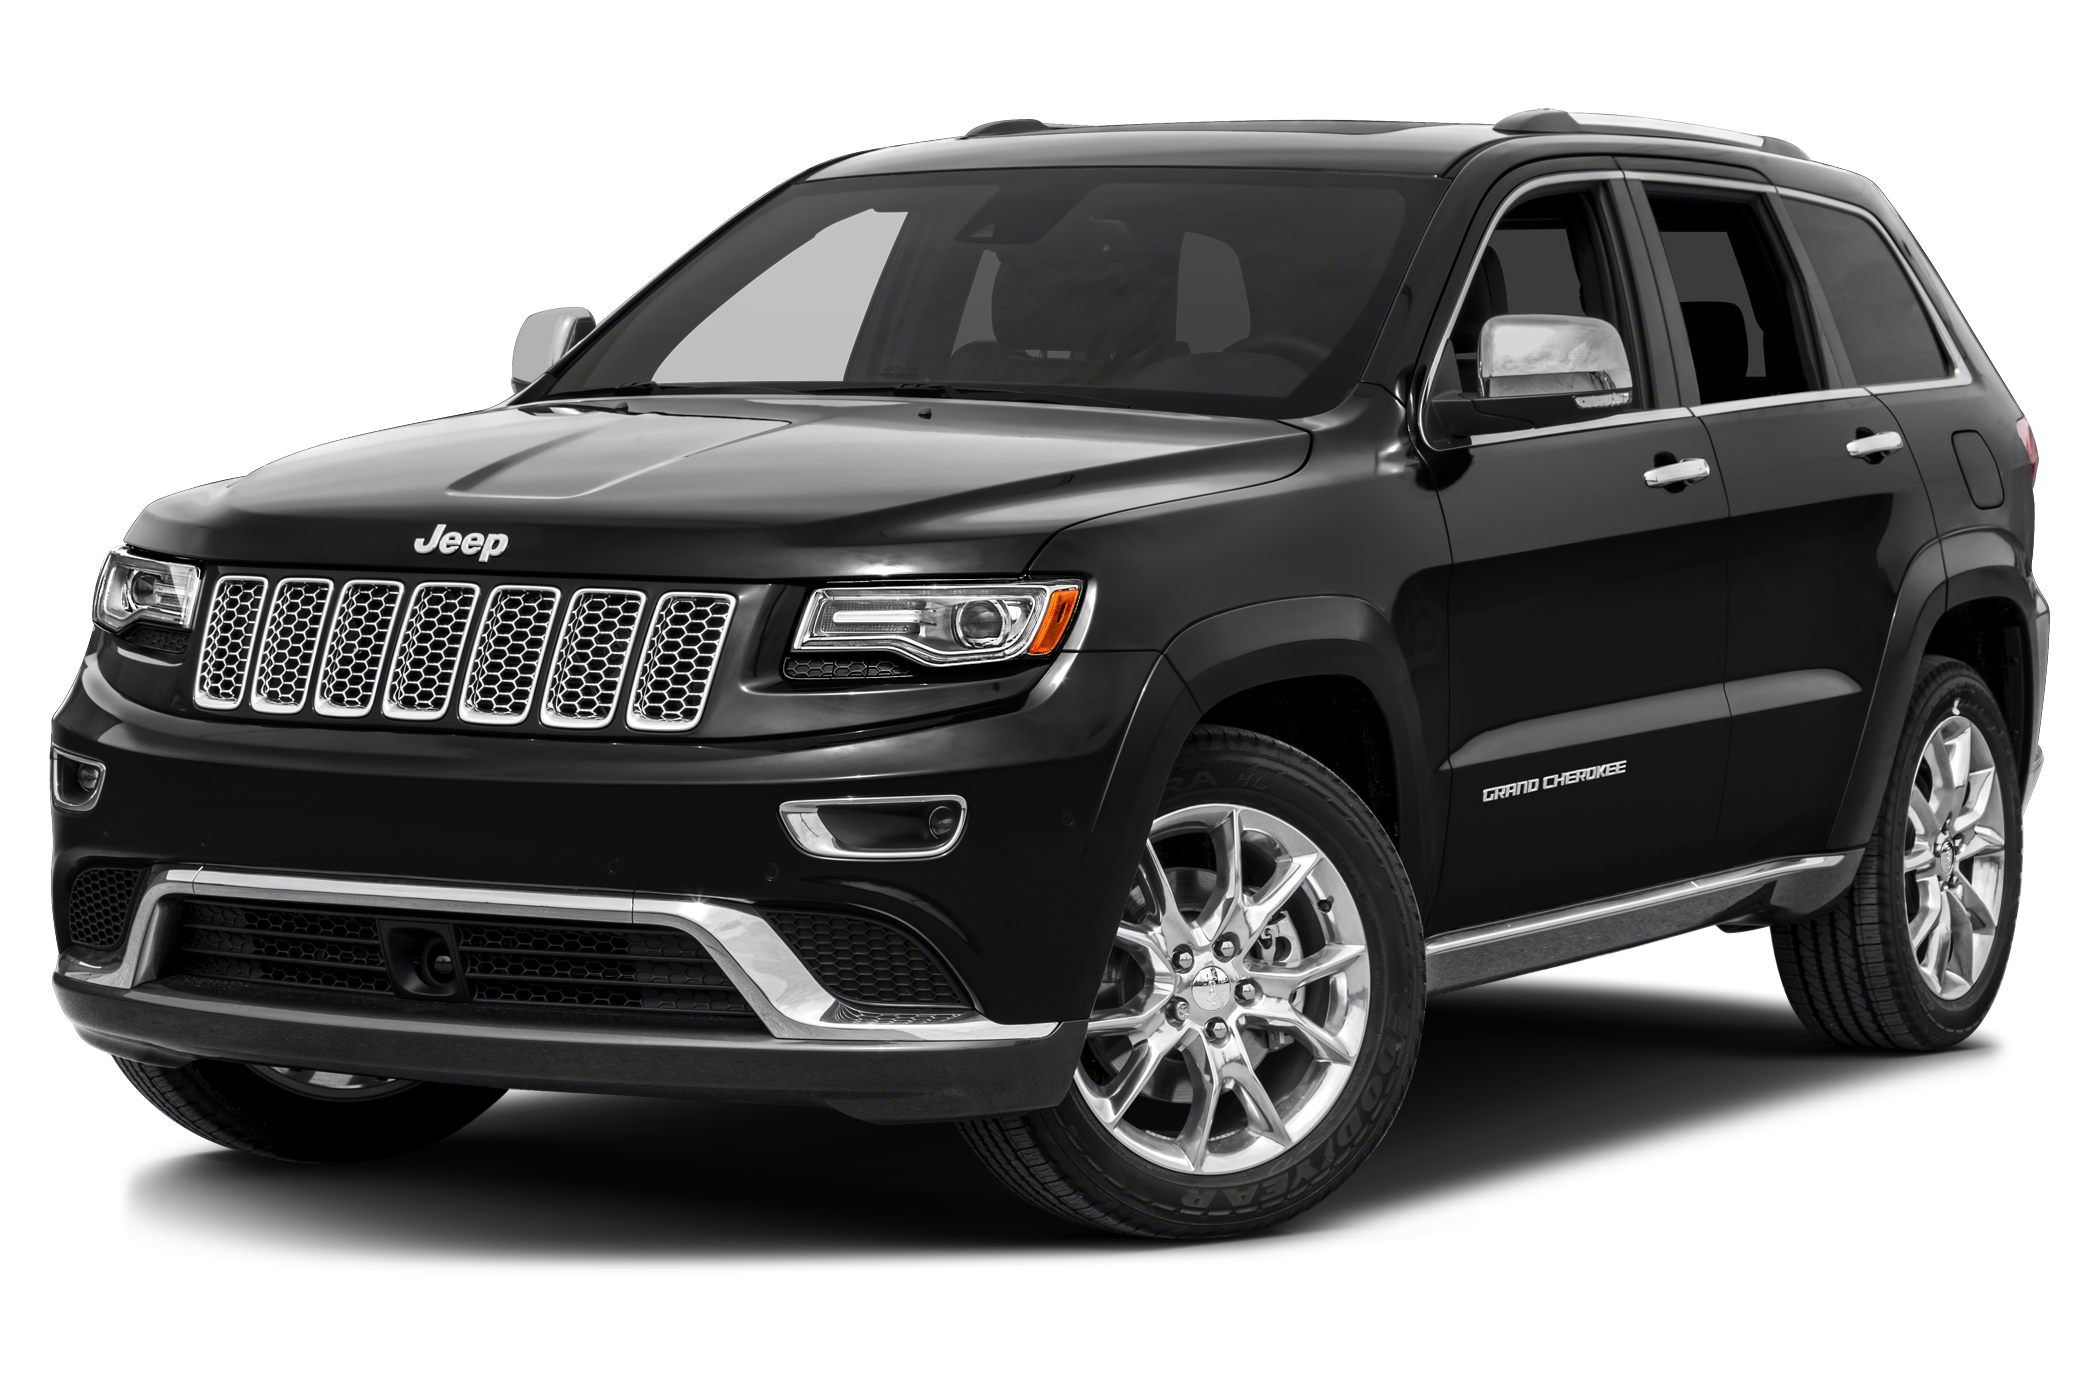 2016 Jeep Grand Cherokee Summit 4dr 4x2 Pictures